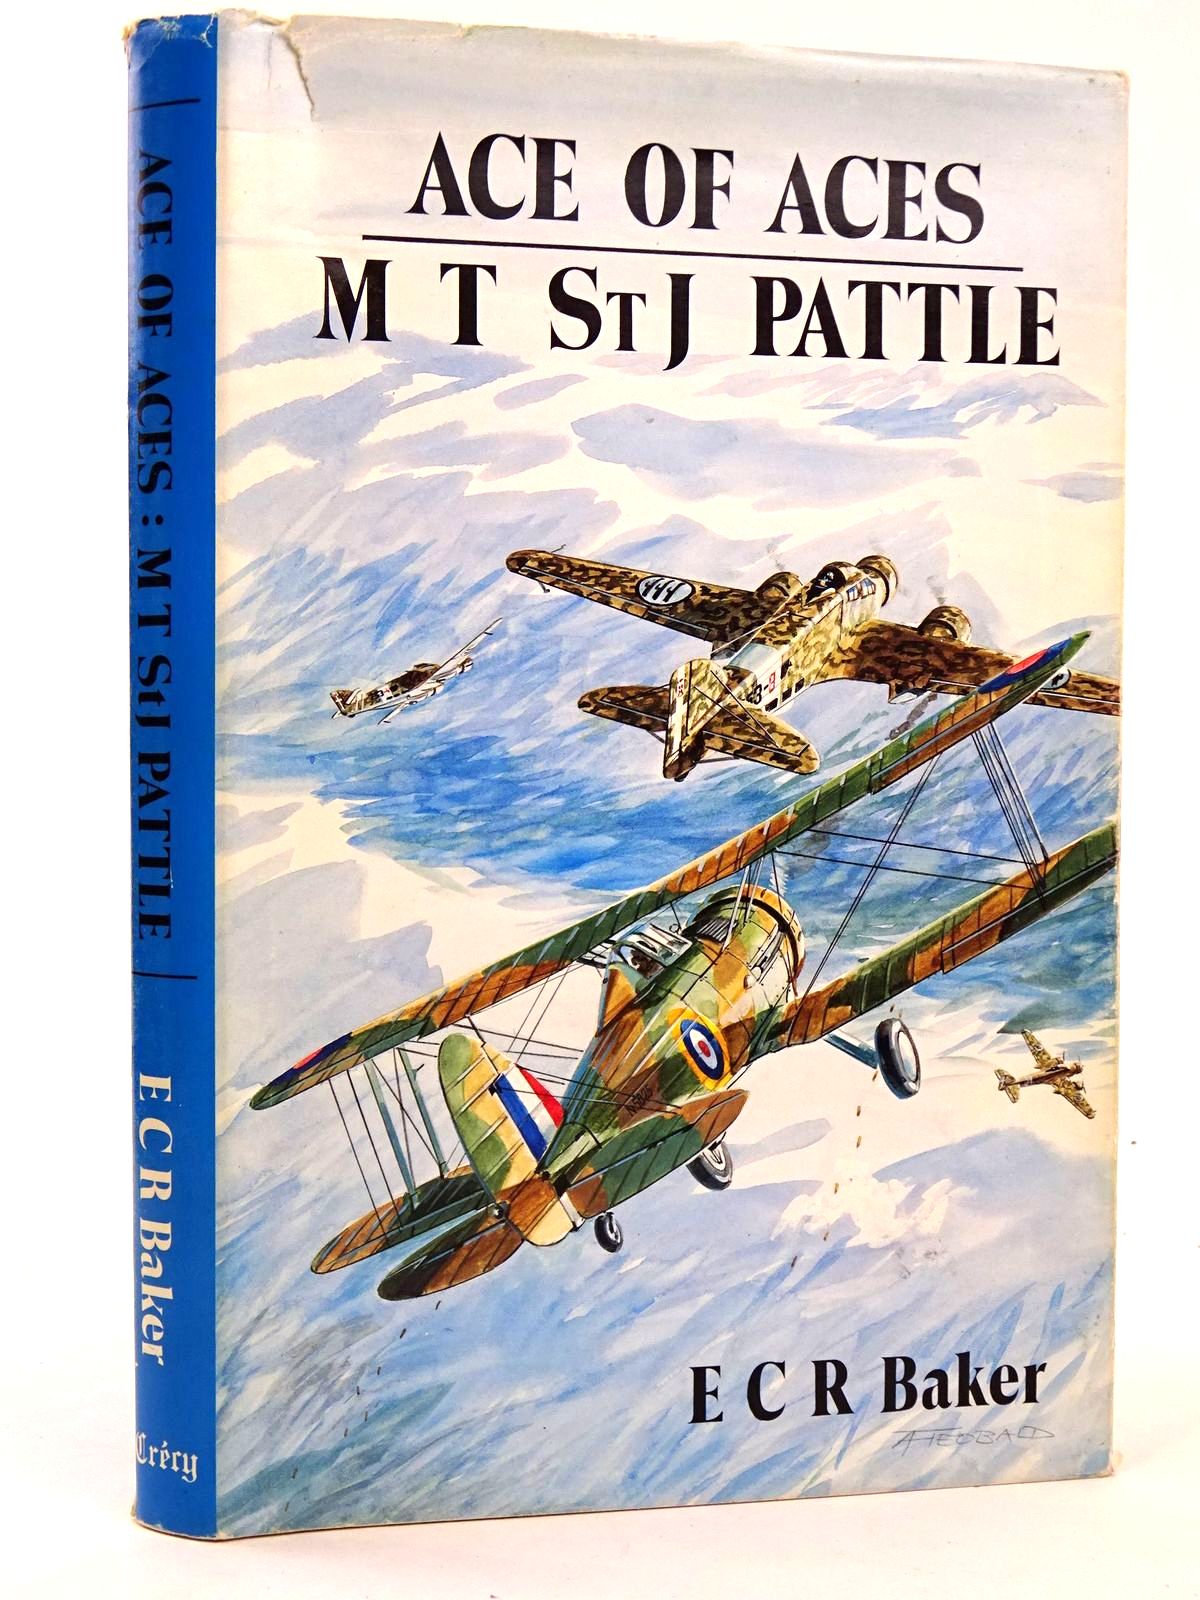 Photo of ACE OF ACES M ST J PATTLE: TOP SCORING ALLIED FIGHTER PILOT OF WORLD WAR II written by Baker, E.C.R published by Crecy (STOCK CODE: 1818431)  for sale by Stella & Rose's Books